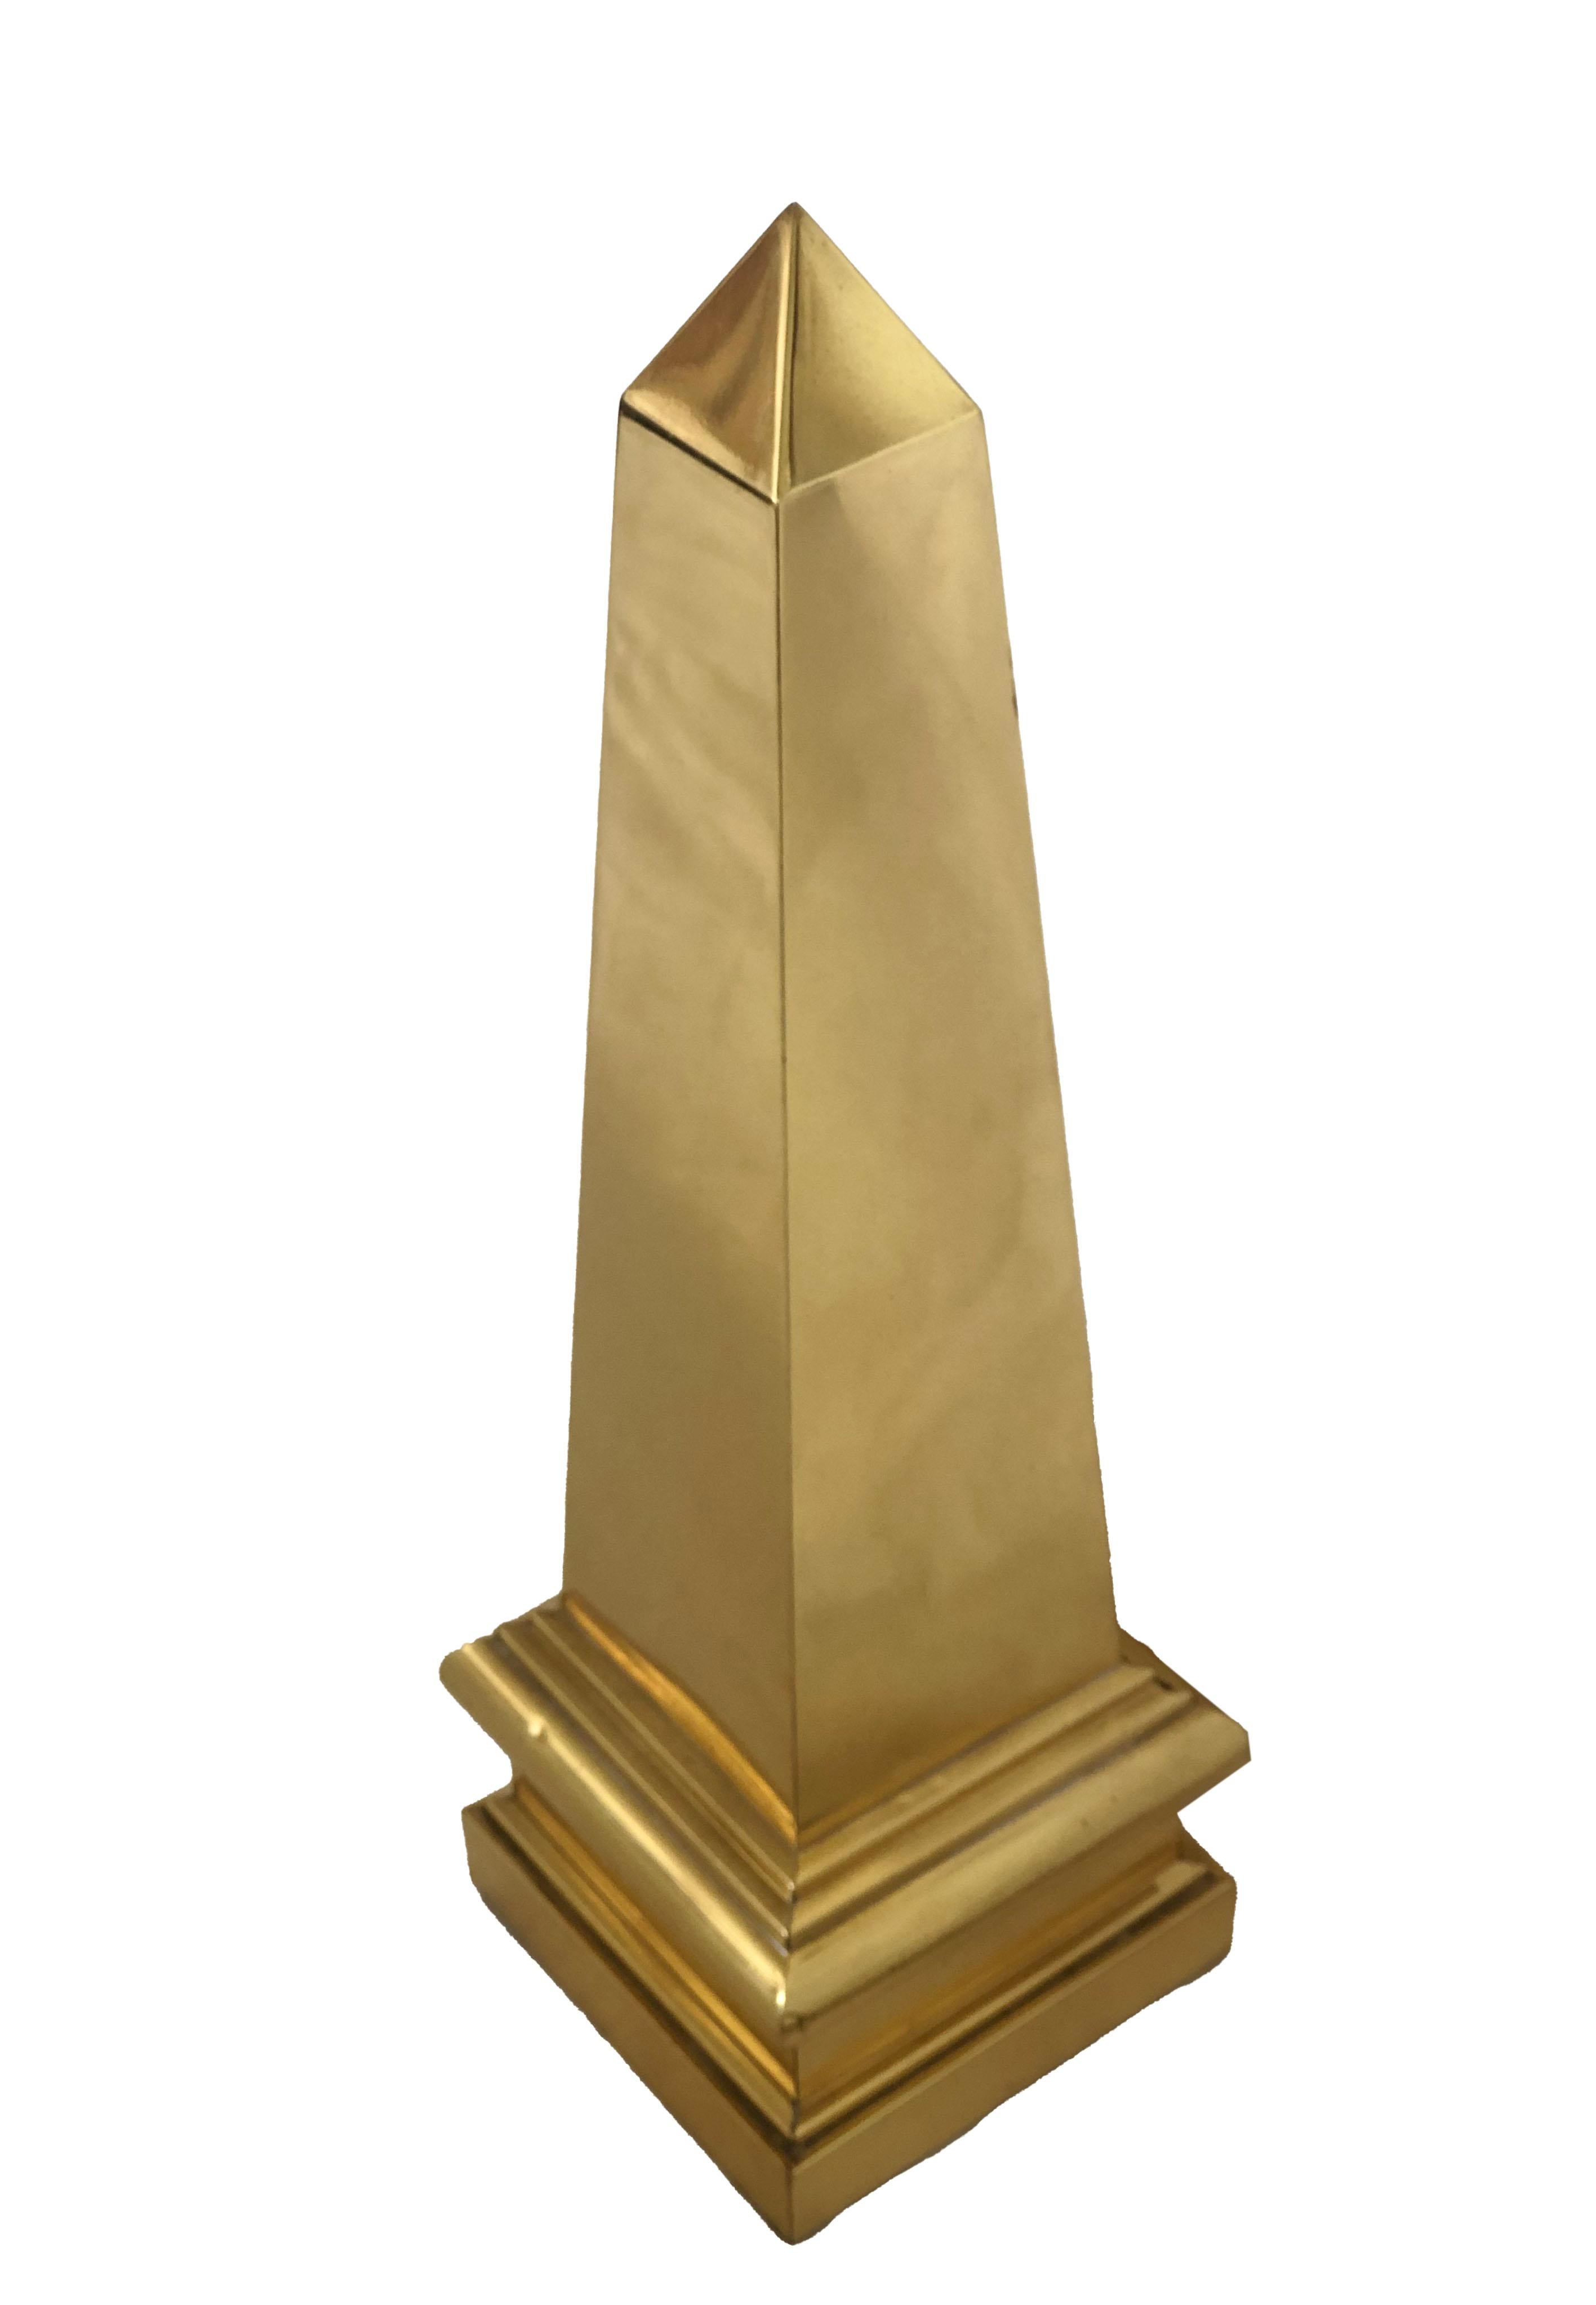 This brass obelisk is beautiful addition to any decor. It has been polished but can always shine a bit more!